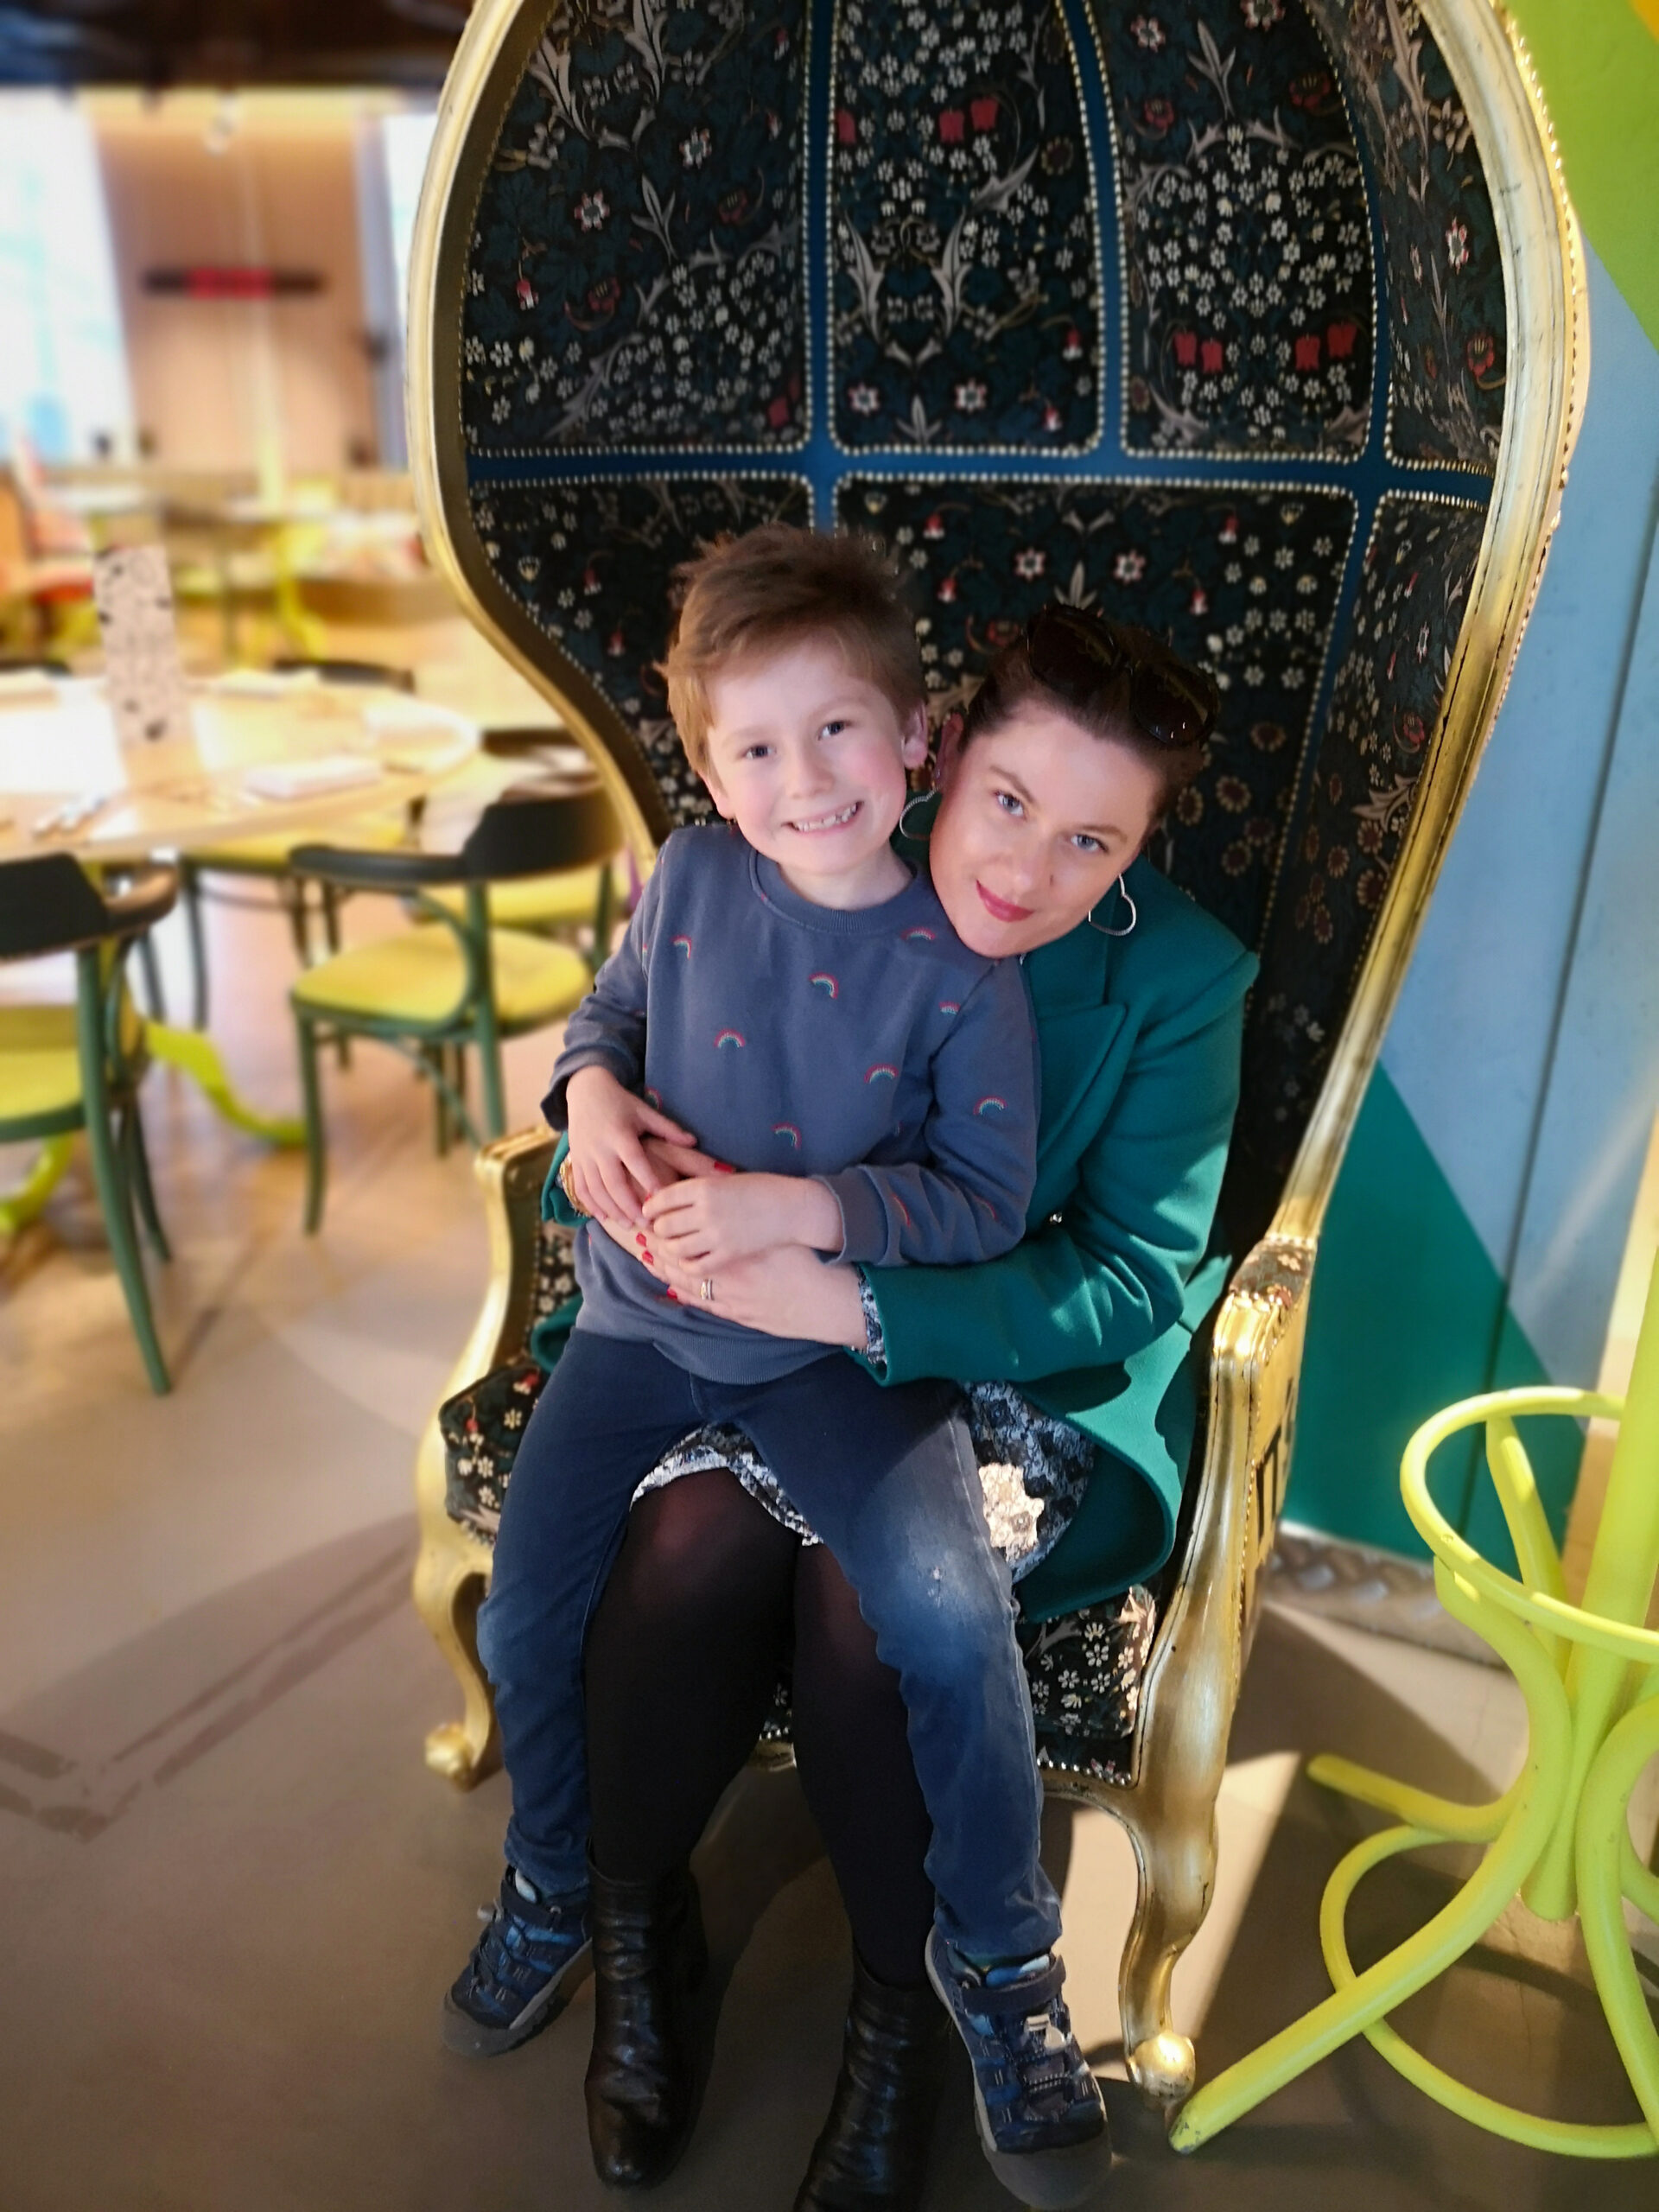 Nhow London, London Hotel, Hotel Review, London, Family Stay, London Weekend, Family-Friendly, Modern Hotel, the Frenchie Mummy, Days Out, Press Trip, London Break, Staycation, Hotel Stay